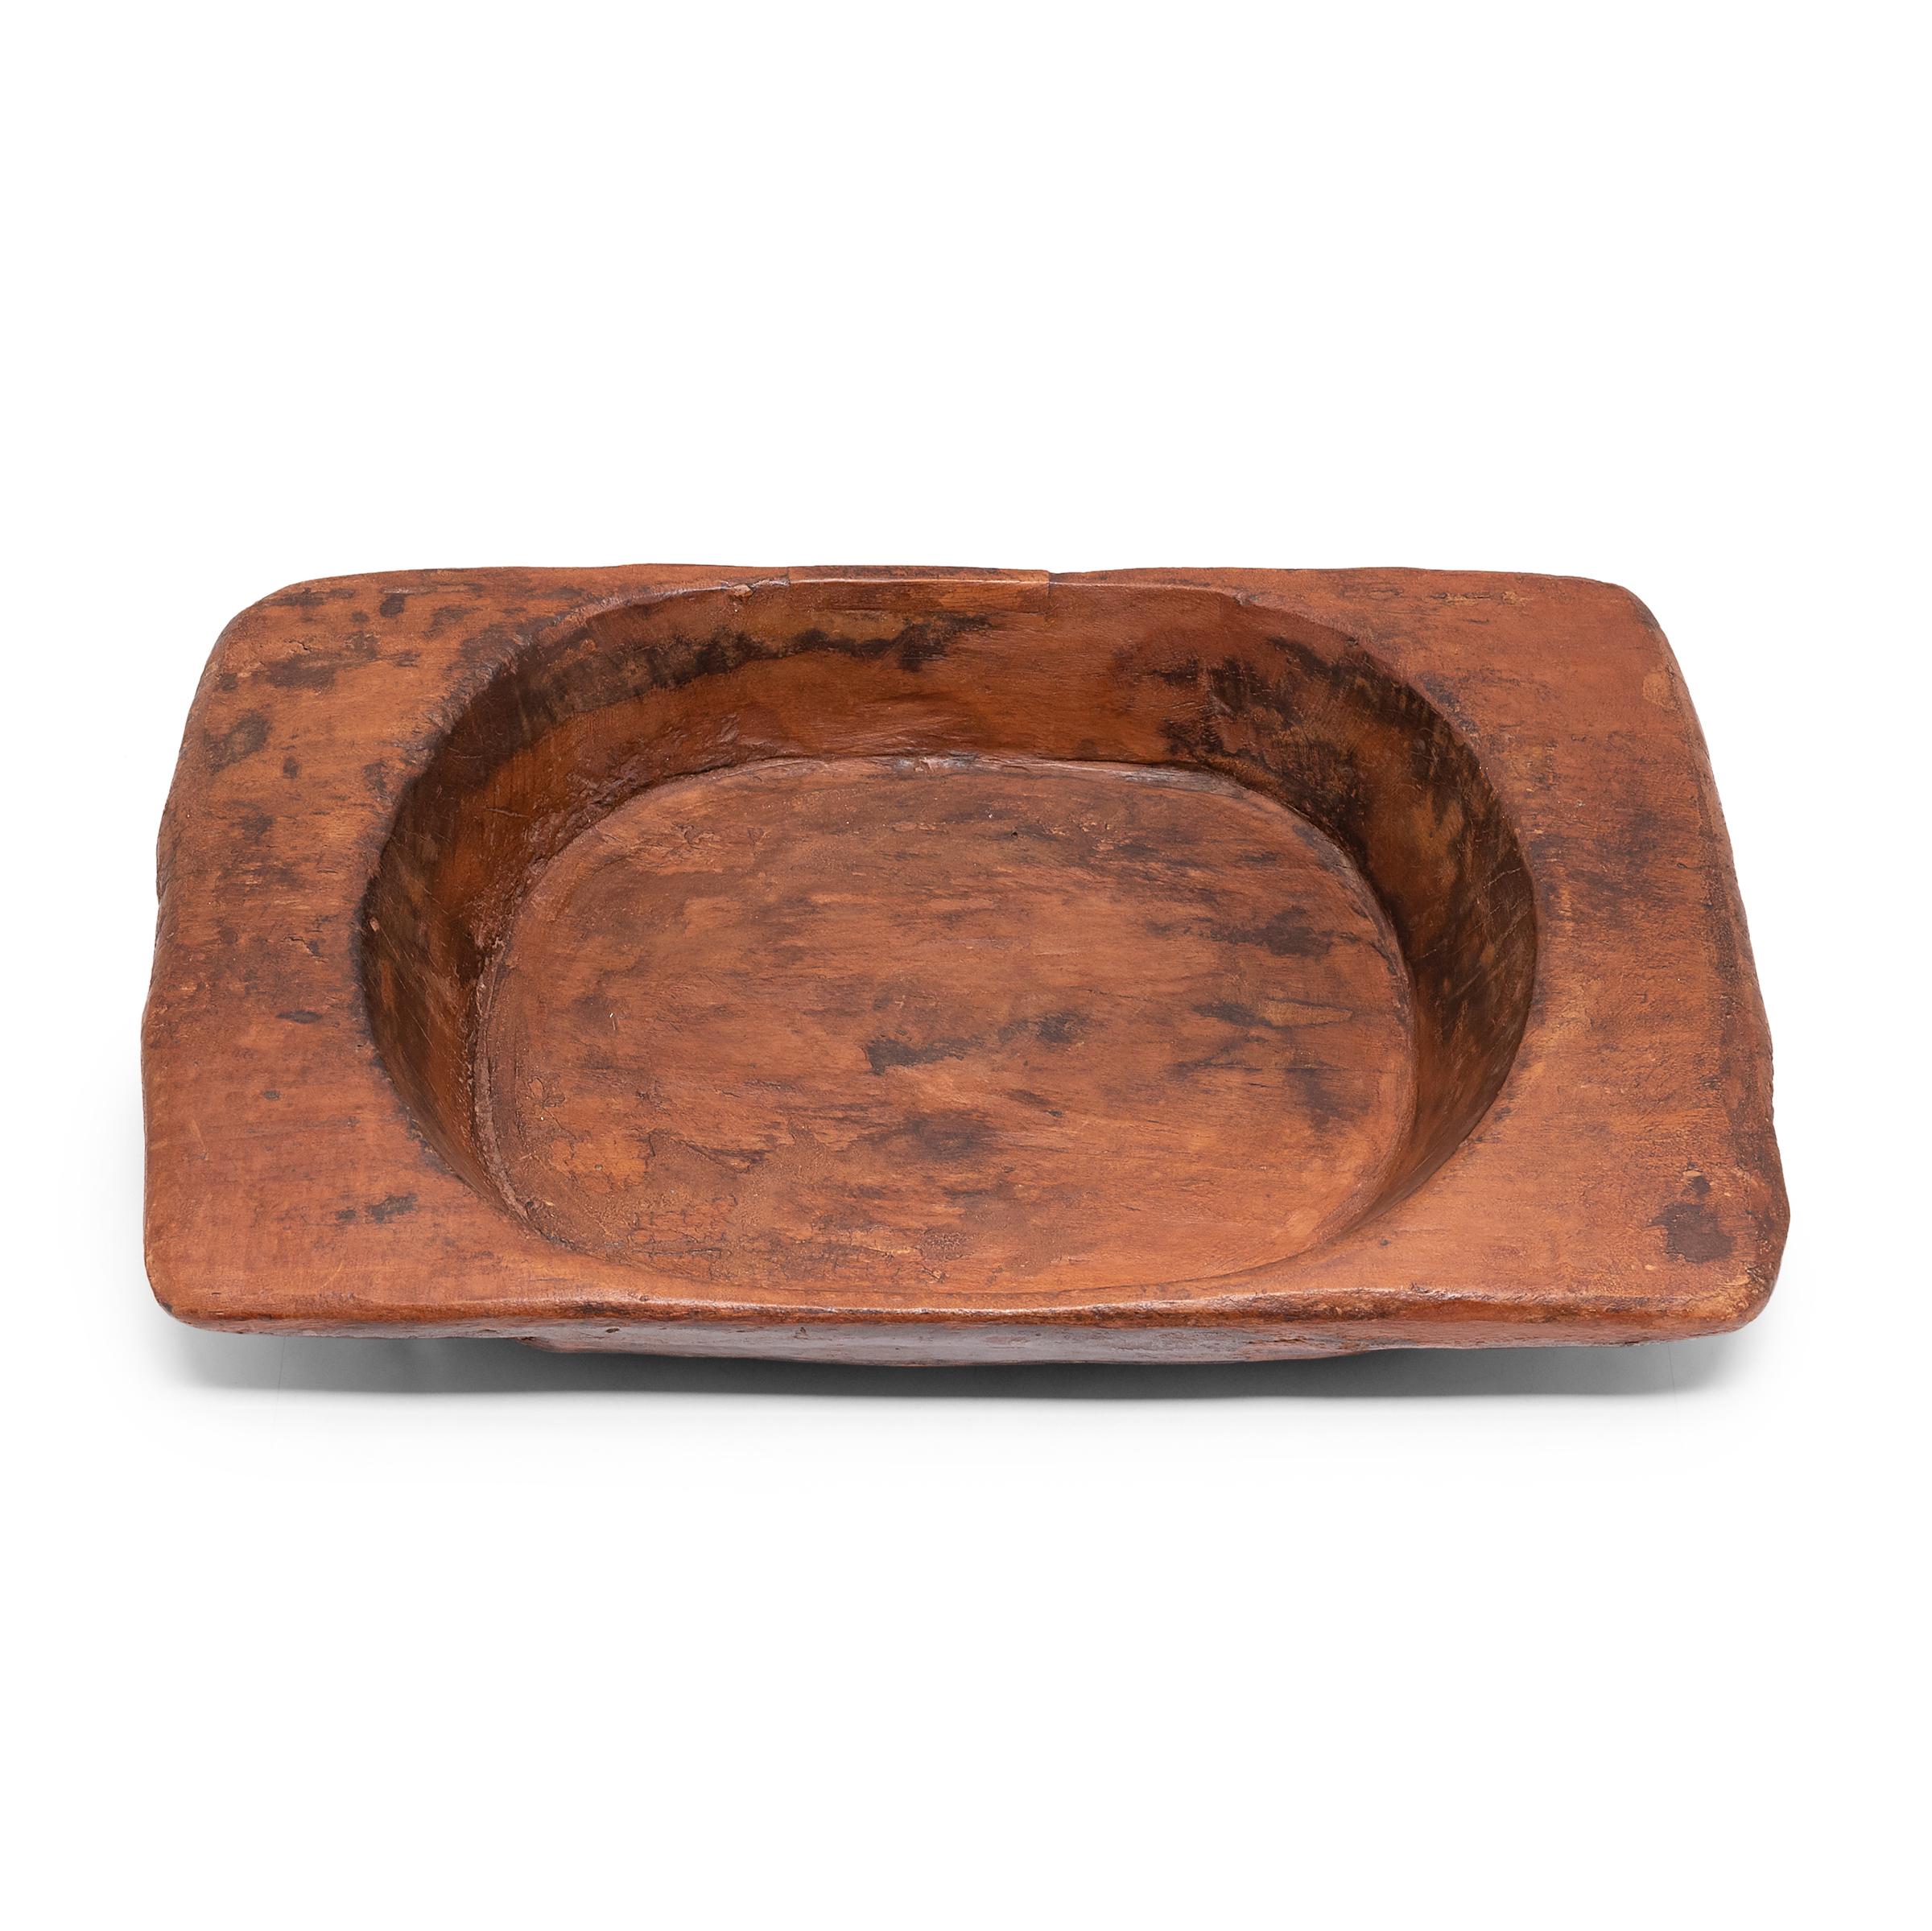 Carved from a large length of northern elmwood, this primitive tray charms with its humble rustic finish and simple form. Marked with use and traces of its original dark finish, the weathered tray calls to be touched. The time-honored tray brings